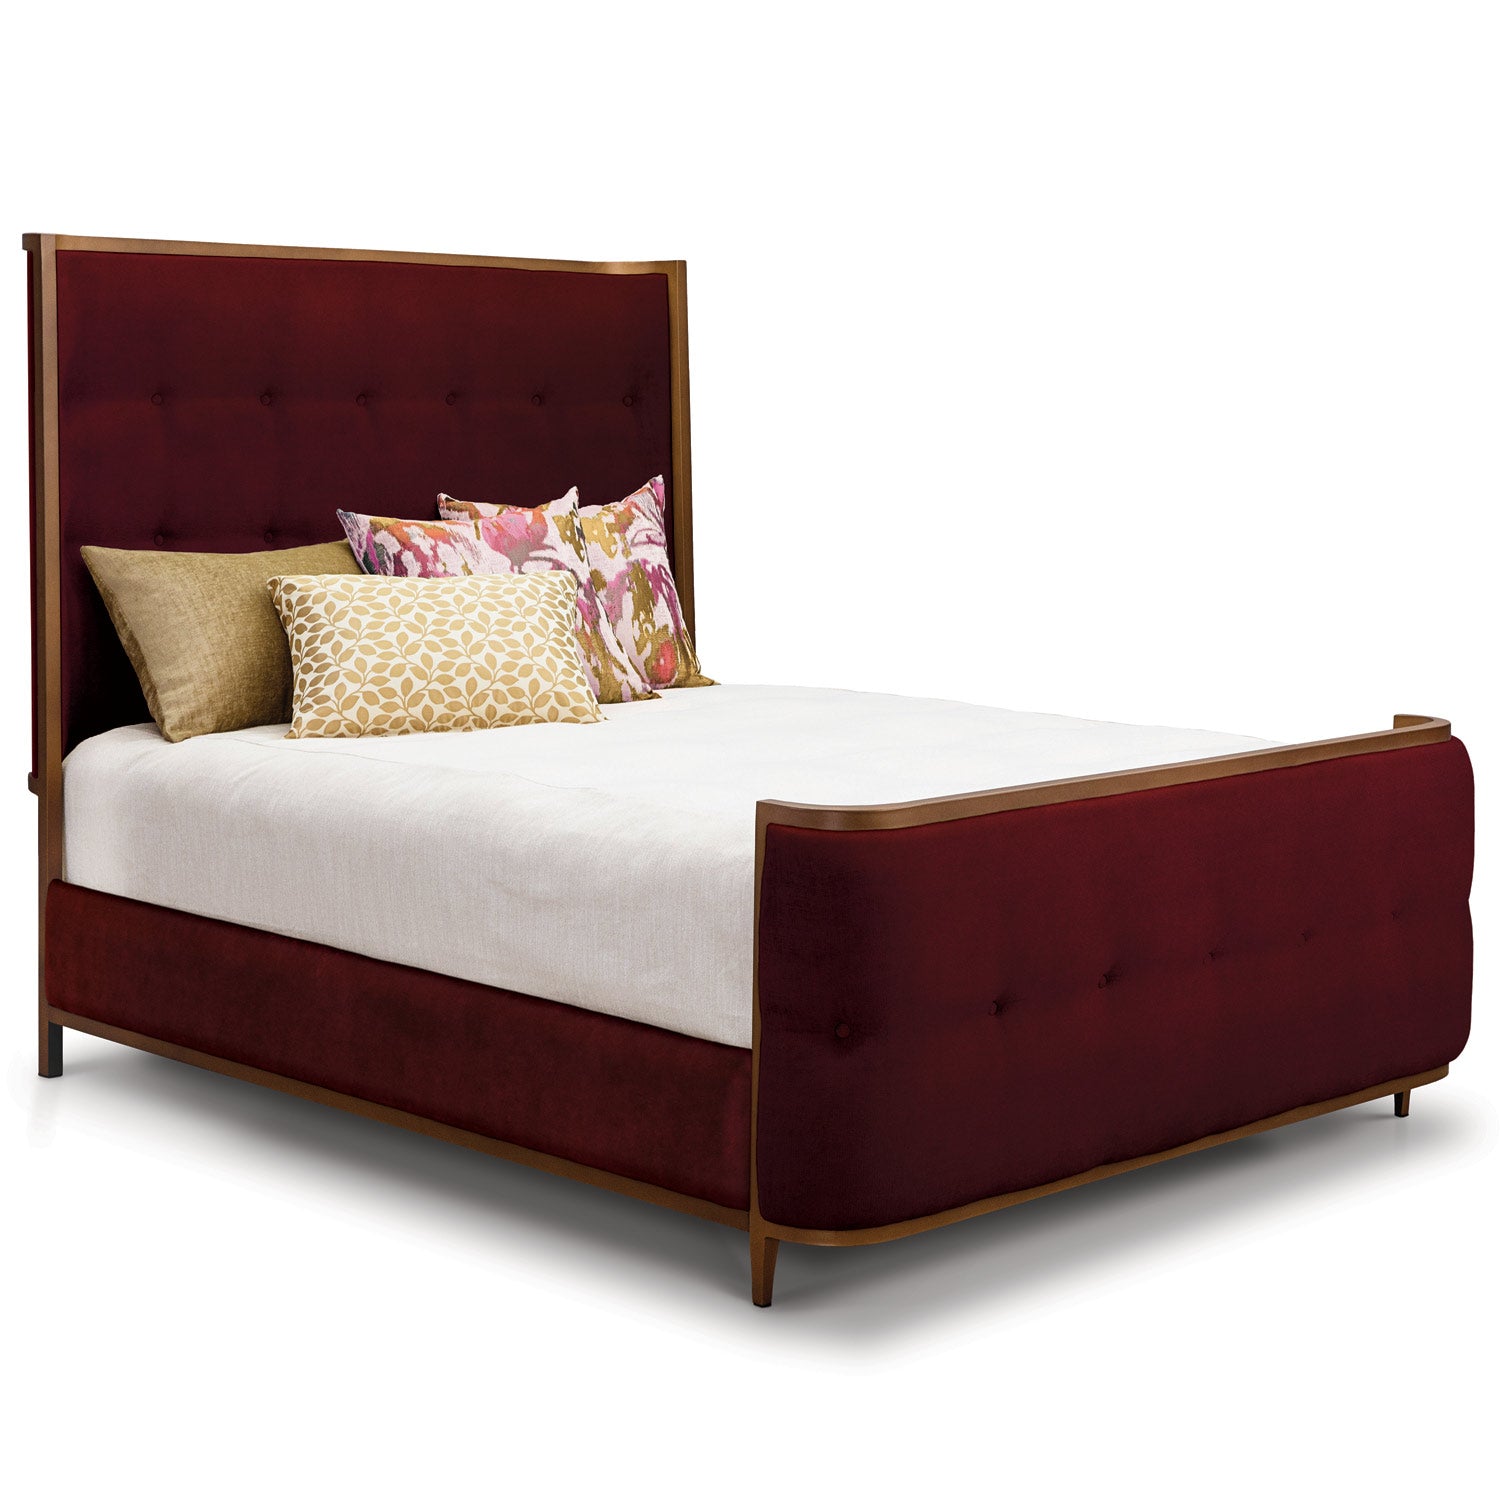 Broadway Upholstered Iron Bed 1201 Wesley Allen Queen CBFS Opaque Copper Finish Chronicle Merlot Fabric Matriae